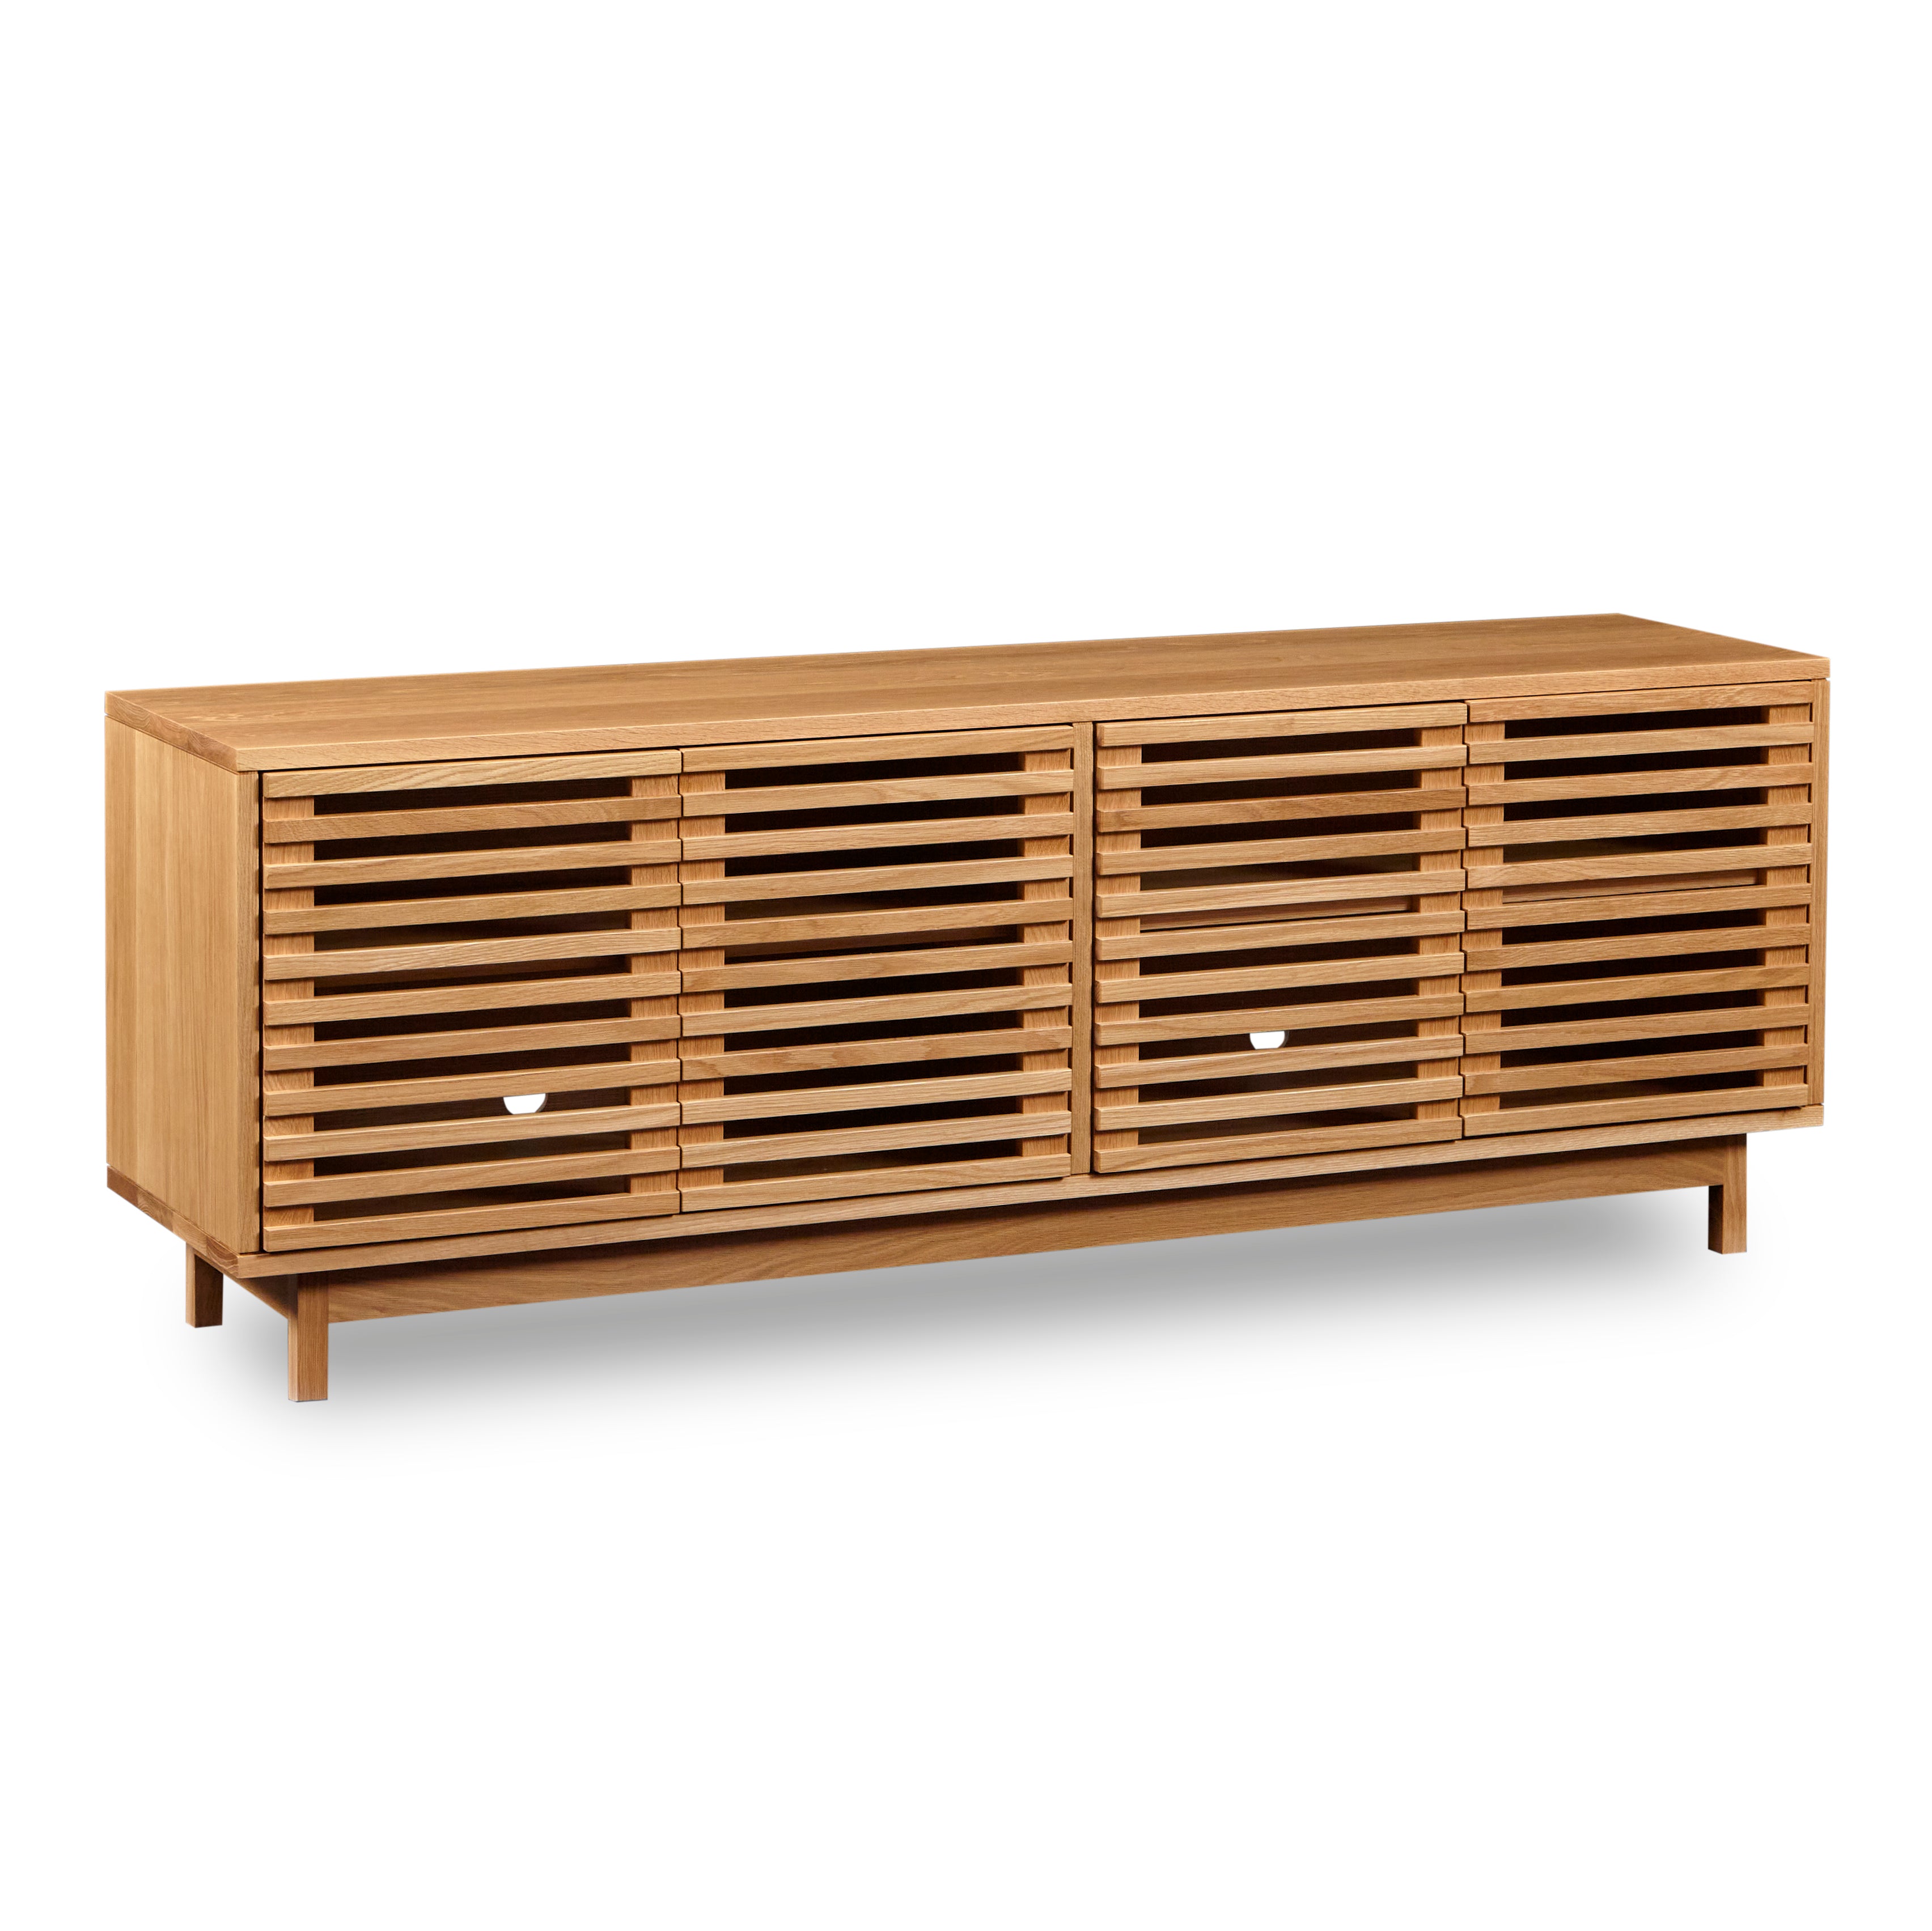 Modern slatted media stand from Chilton Furniture in large size and white oak wood